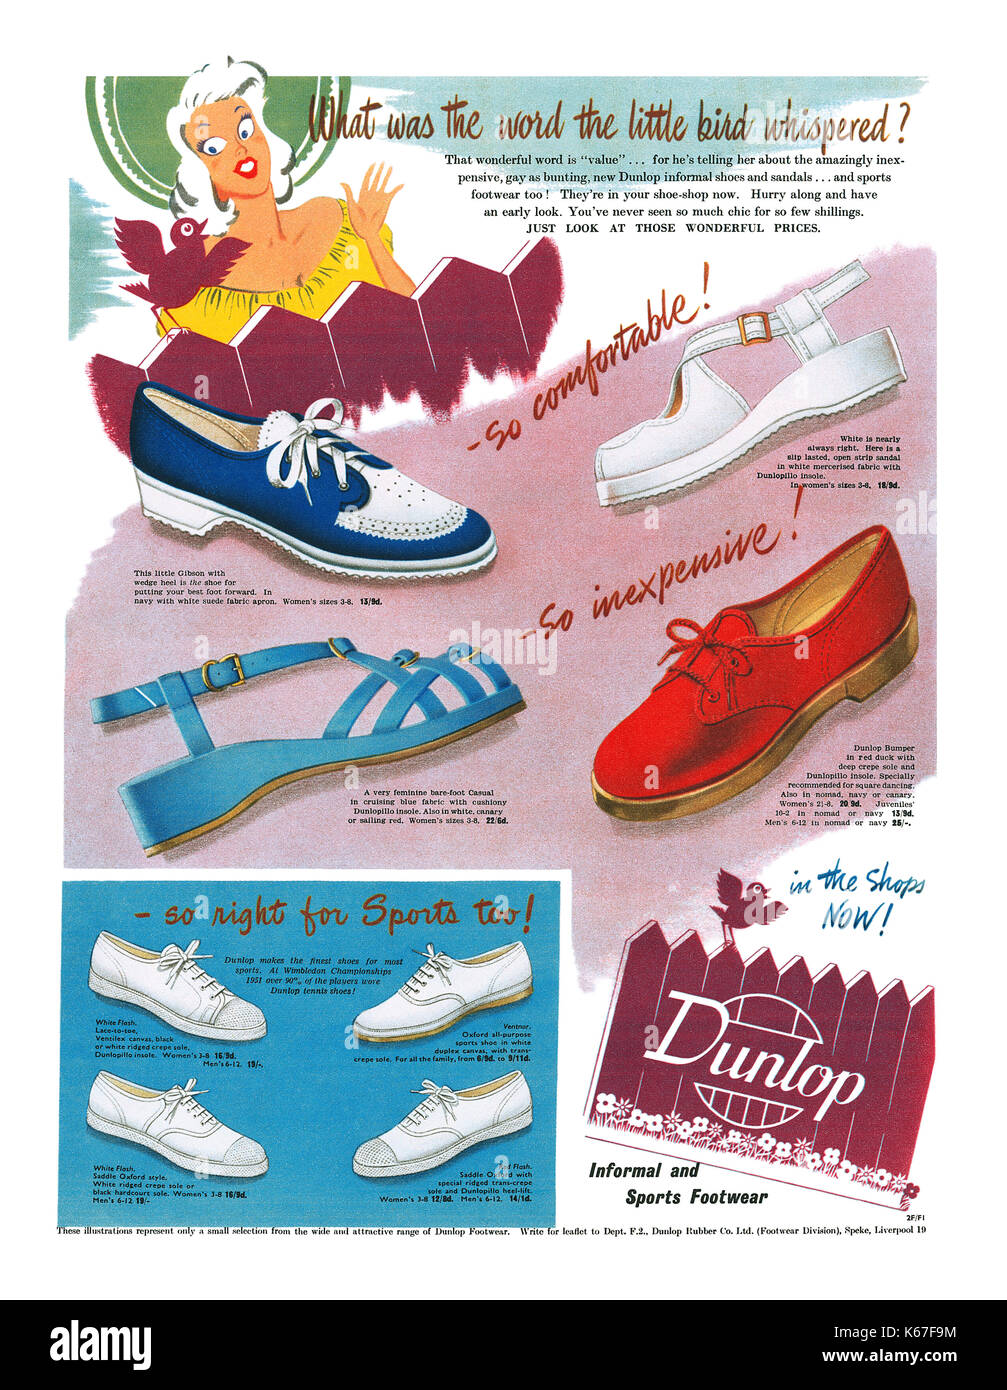 1952 British advertisement for Dunlop shoes. Stock Photo